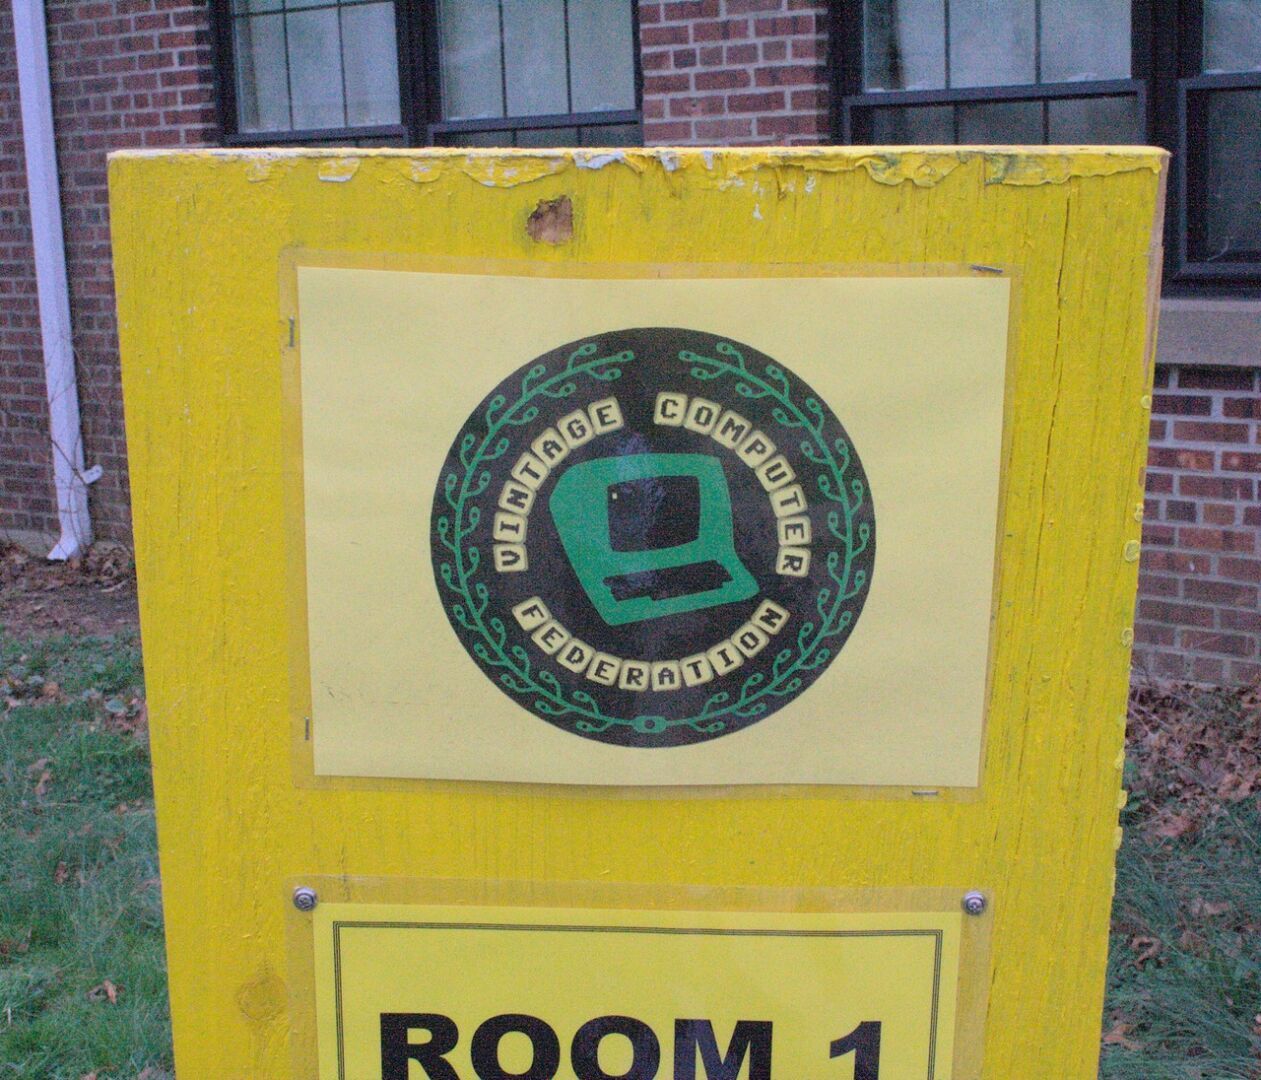 The Vintage Computer Federation logo, which features an older-style computer in the middle of a circle, placed onto a wooden sign.